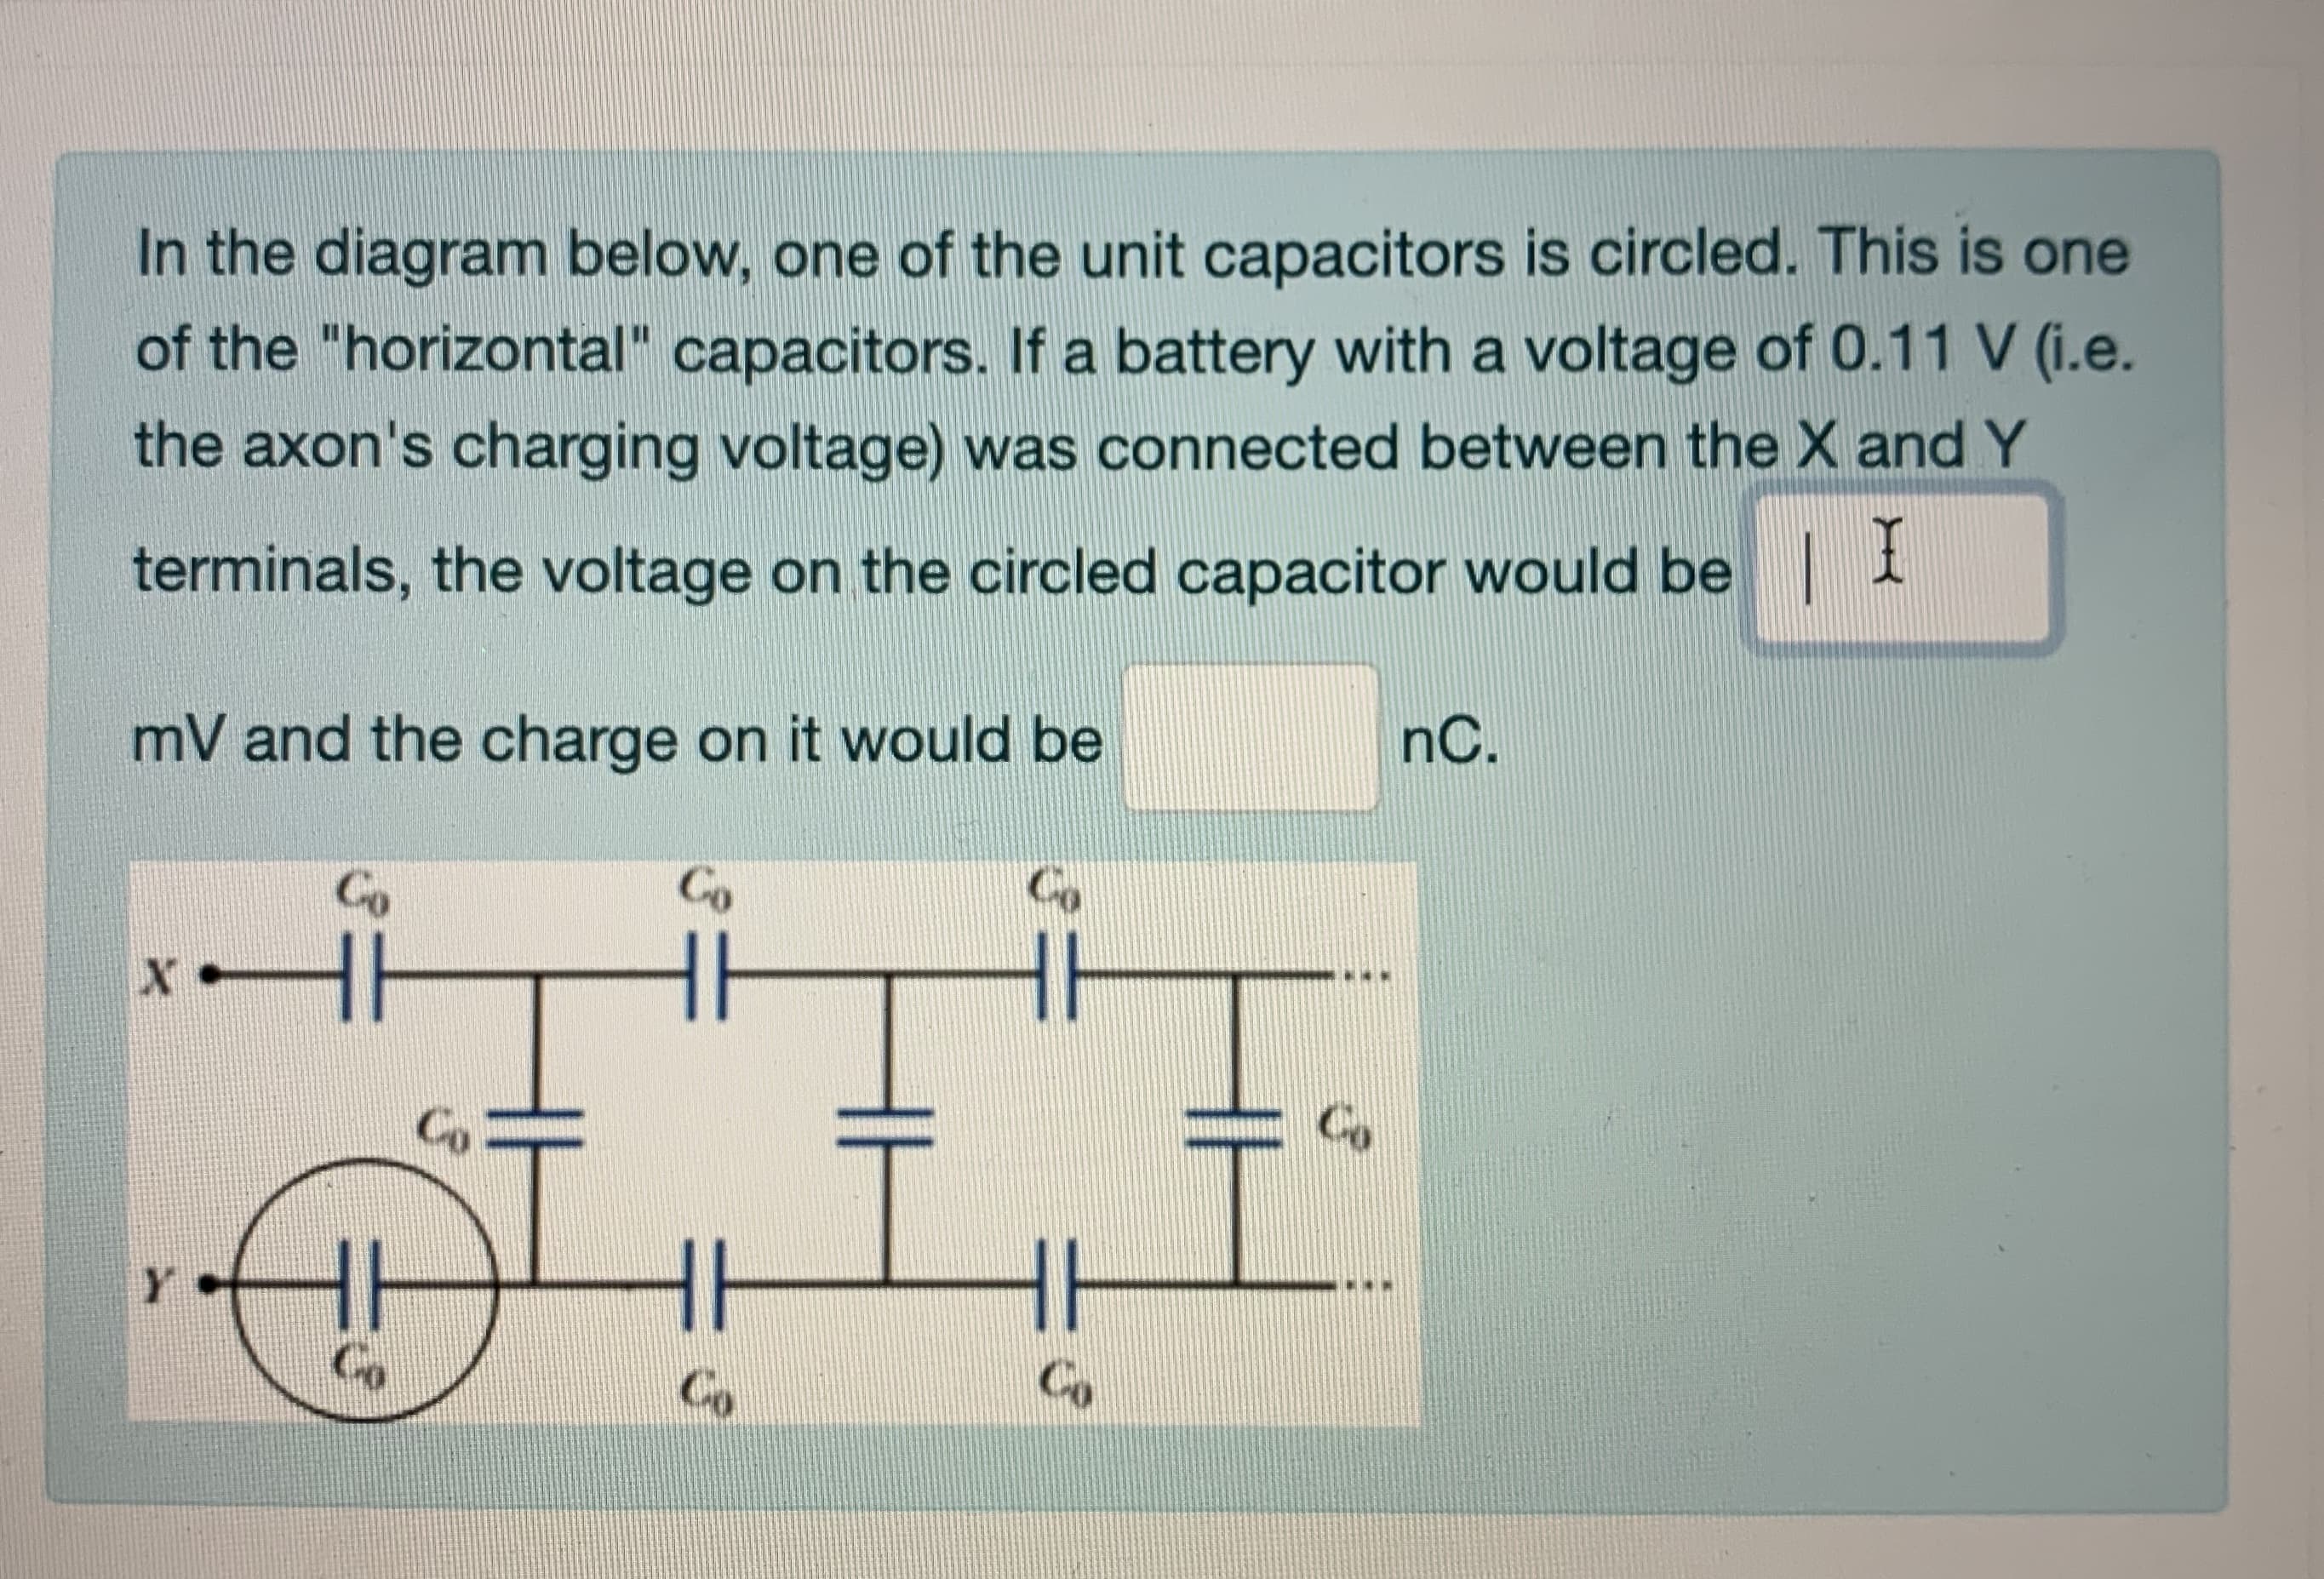 In the diagram below, one of the unit capacitors is circled. This is one
of the "horizontal" capacitors. If a battery with a voltage of 0.11 V (i.e.
the axon's charging voltage) was connected between the X and Y
terminals, the voltage on the circled capacitor would be 1
mV and the charge on it would be
nC.
